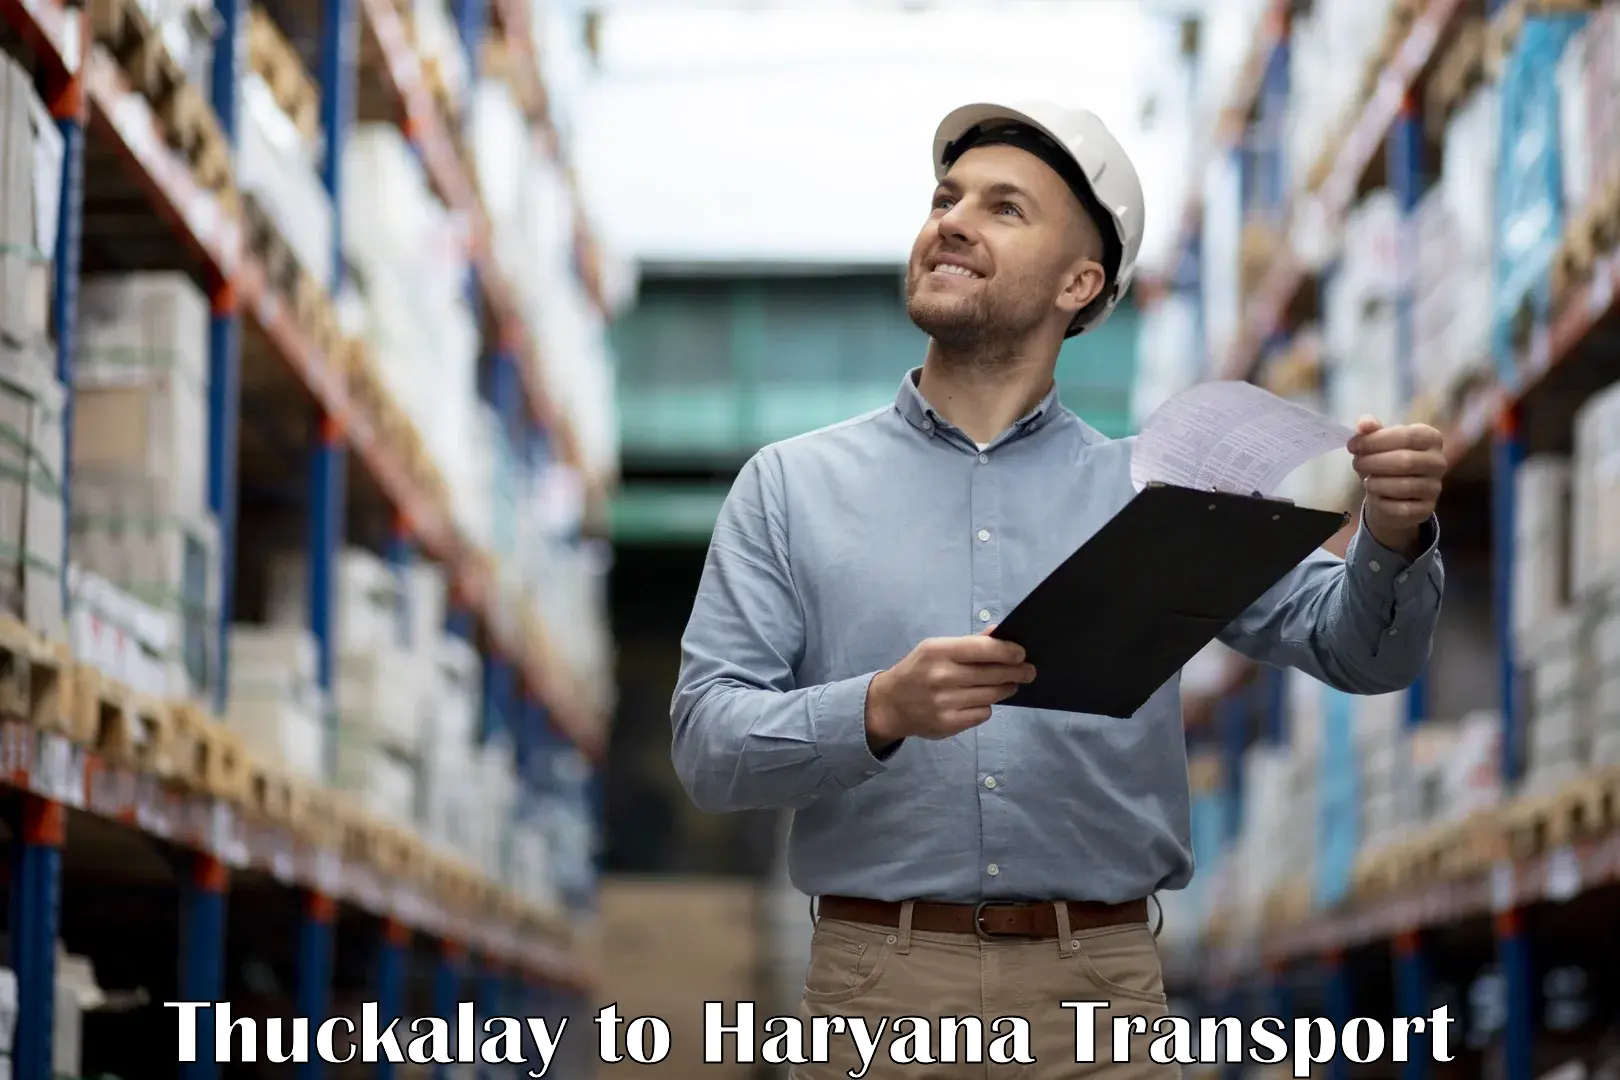 Road transport online services Thuckalay to Sonipat